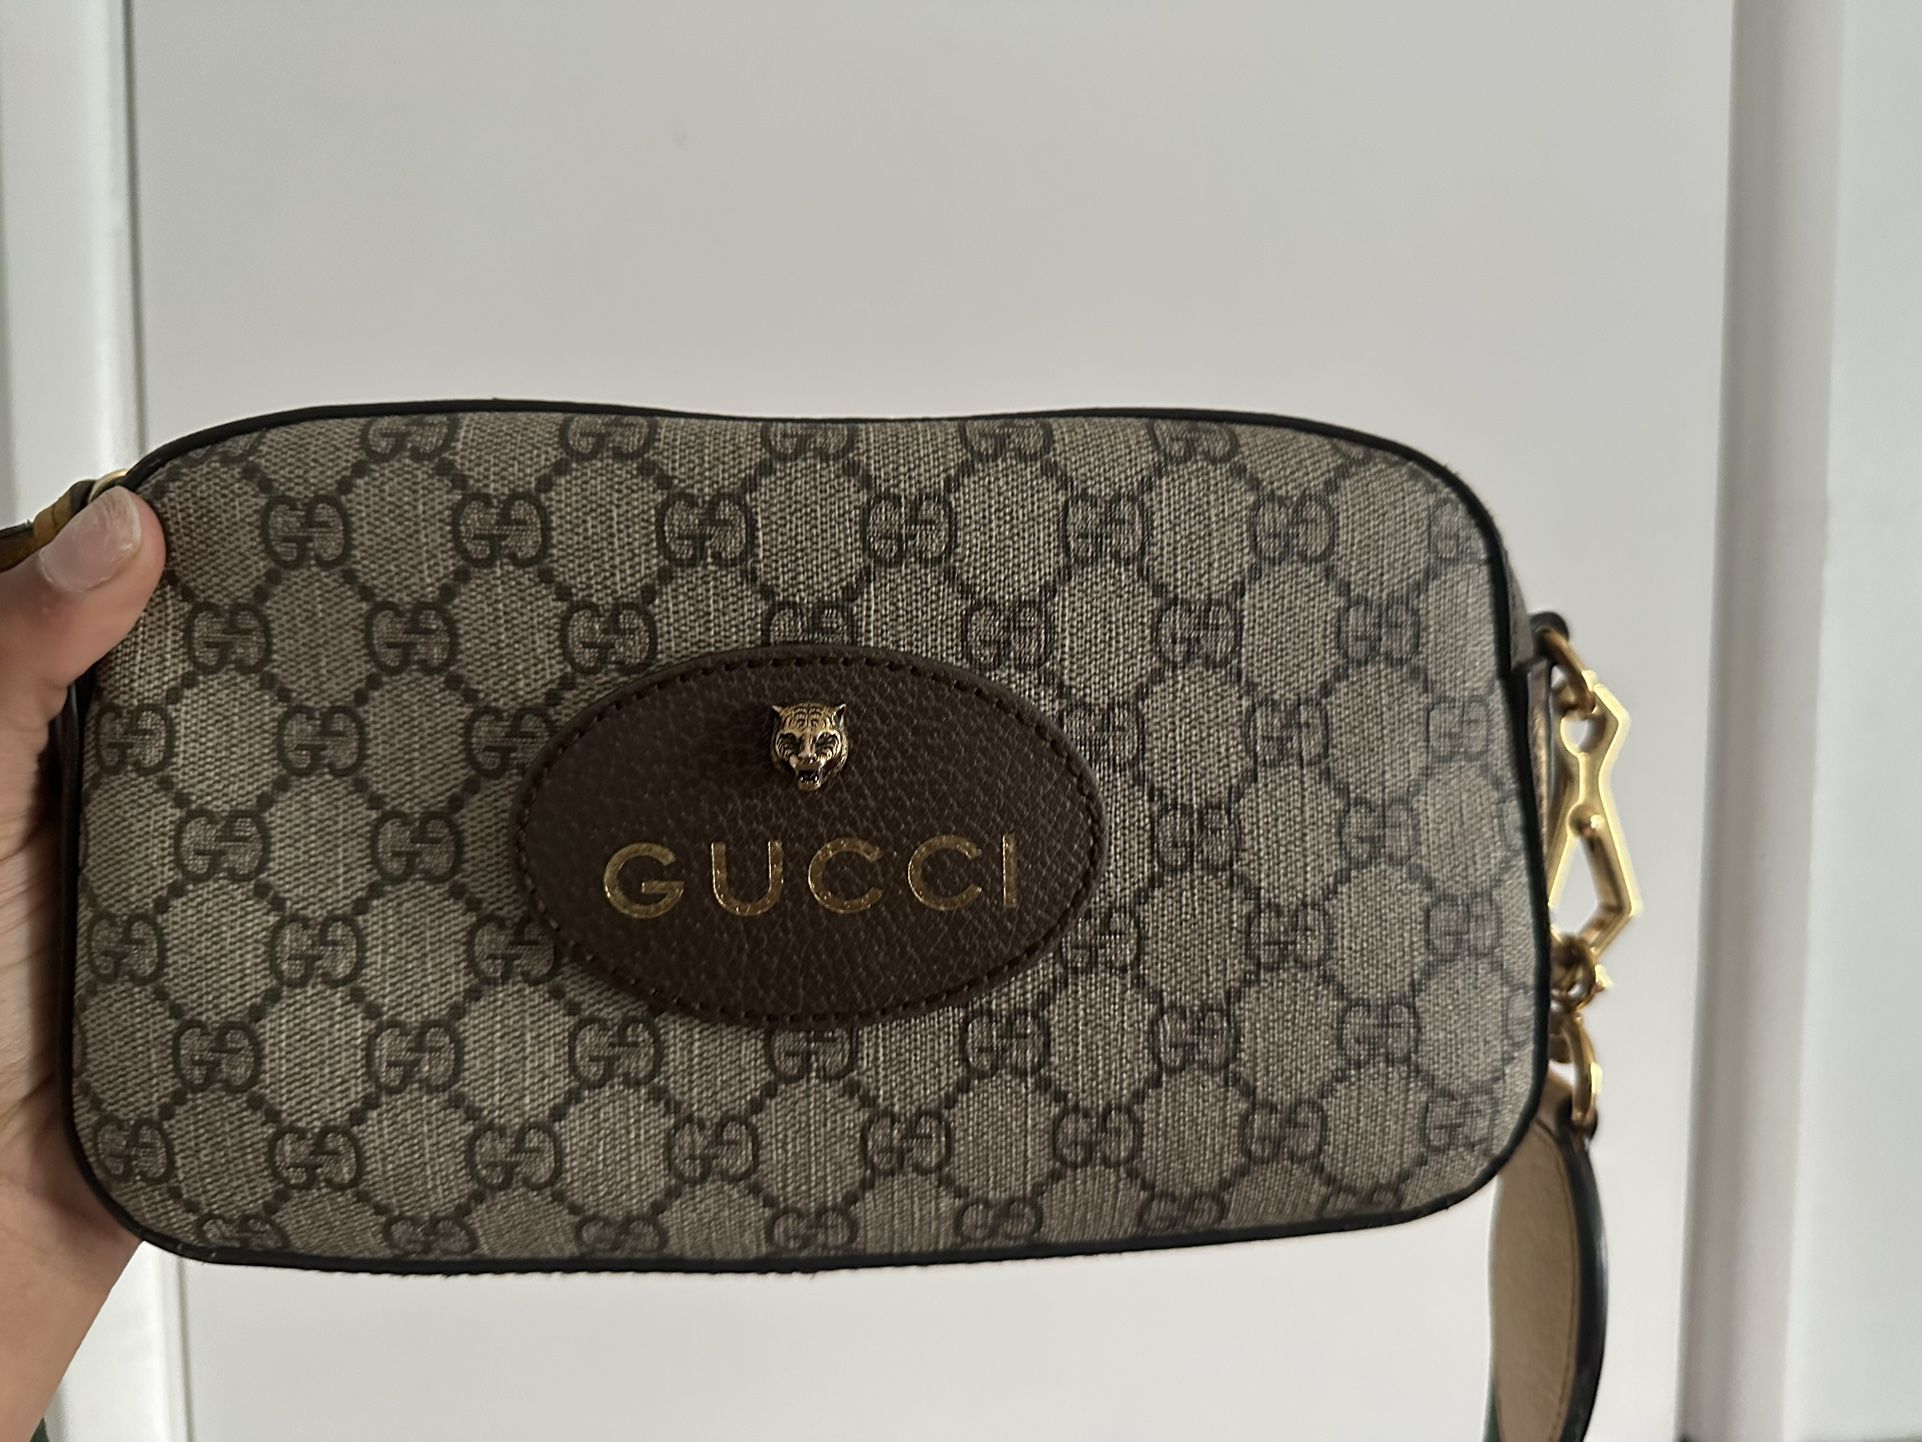 GUCCI BAG FOR SALE 